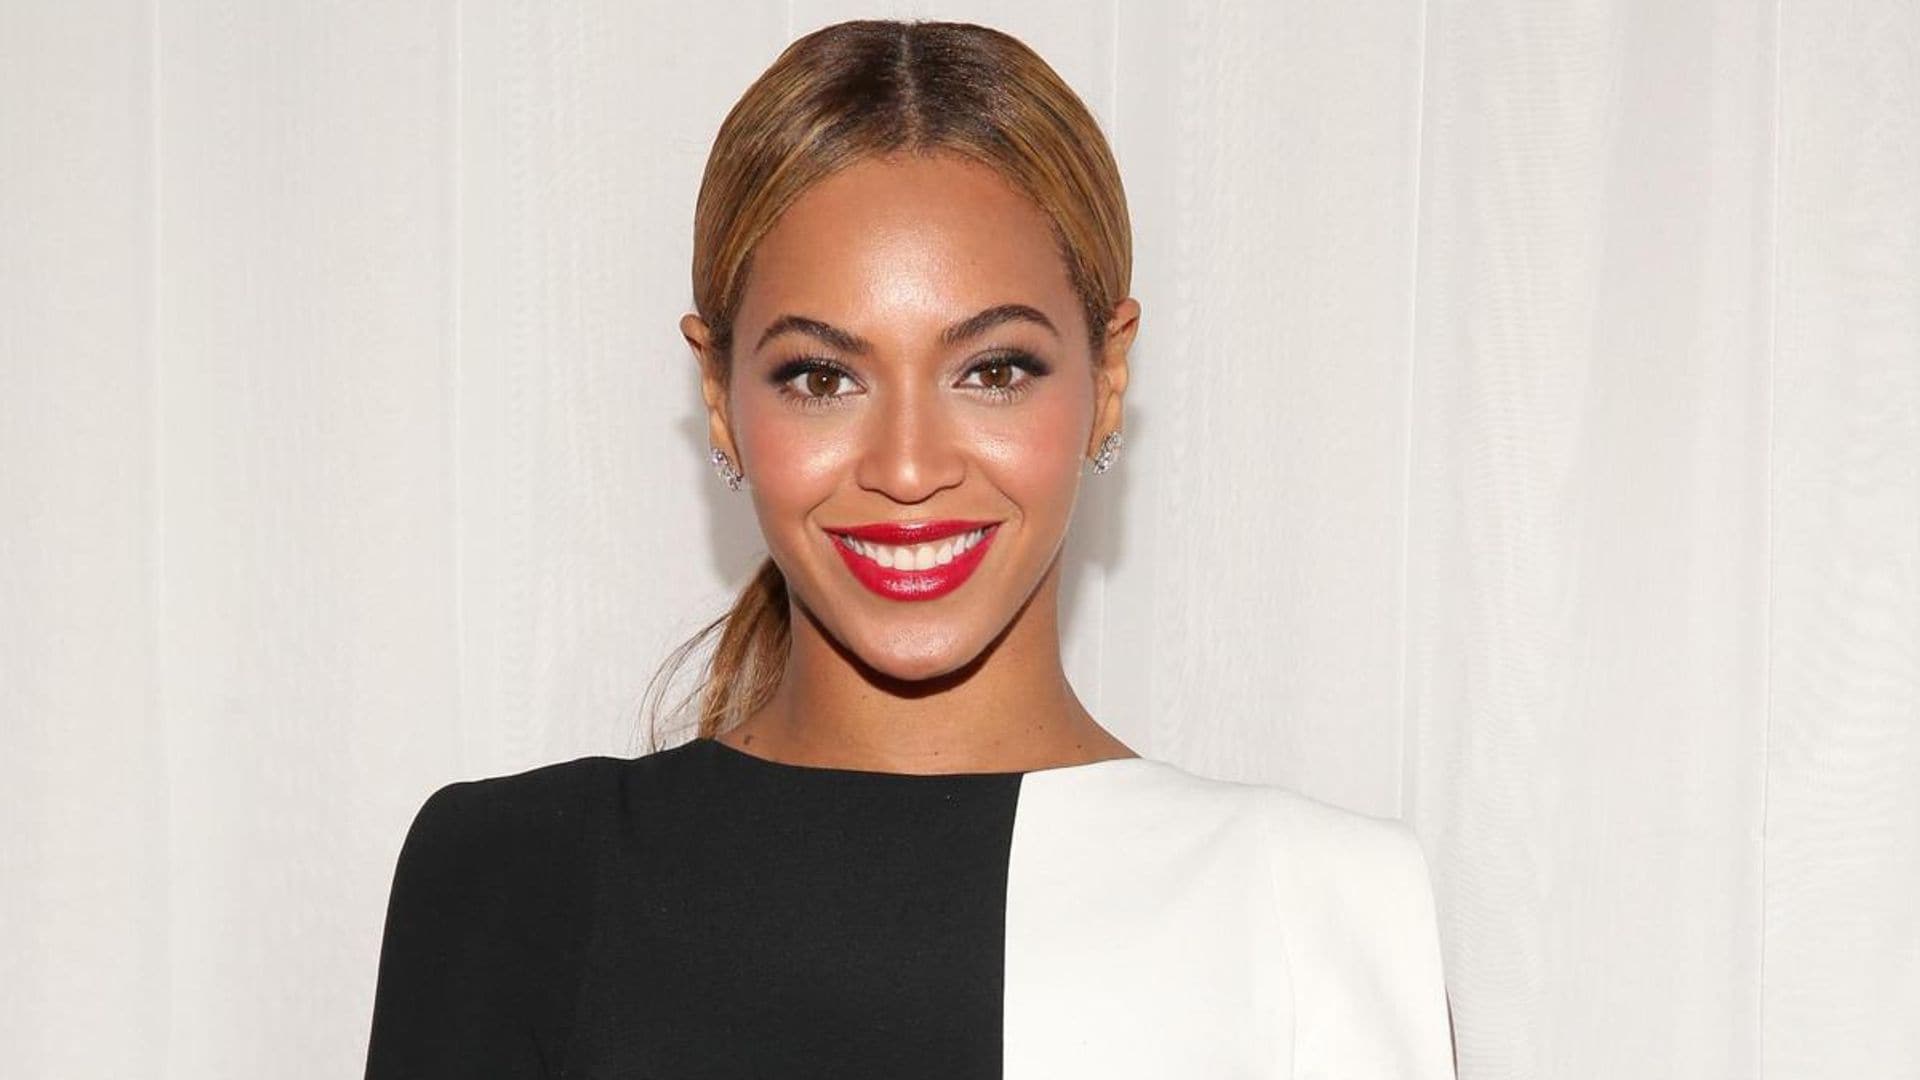 Beyoncé is officially an Oscar nominee! The star receives her first Oscar nomination for King Richard